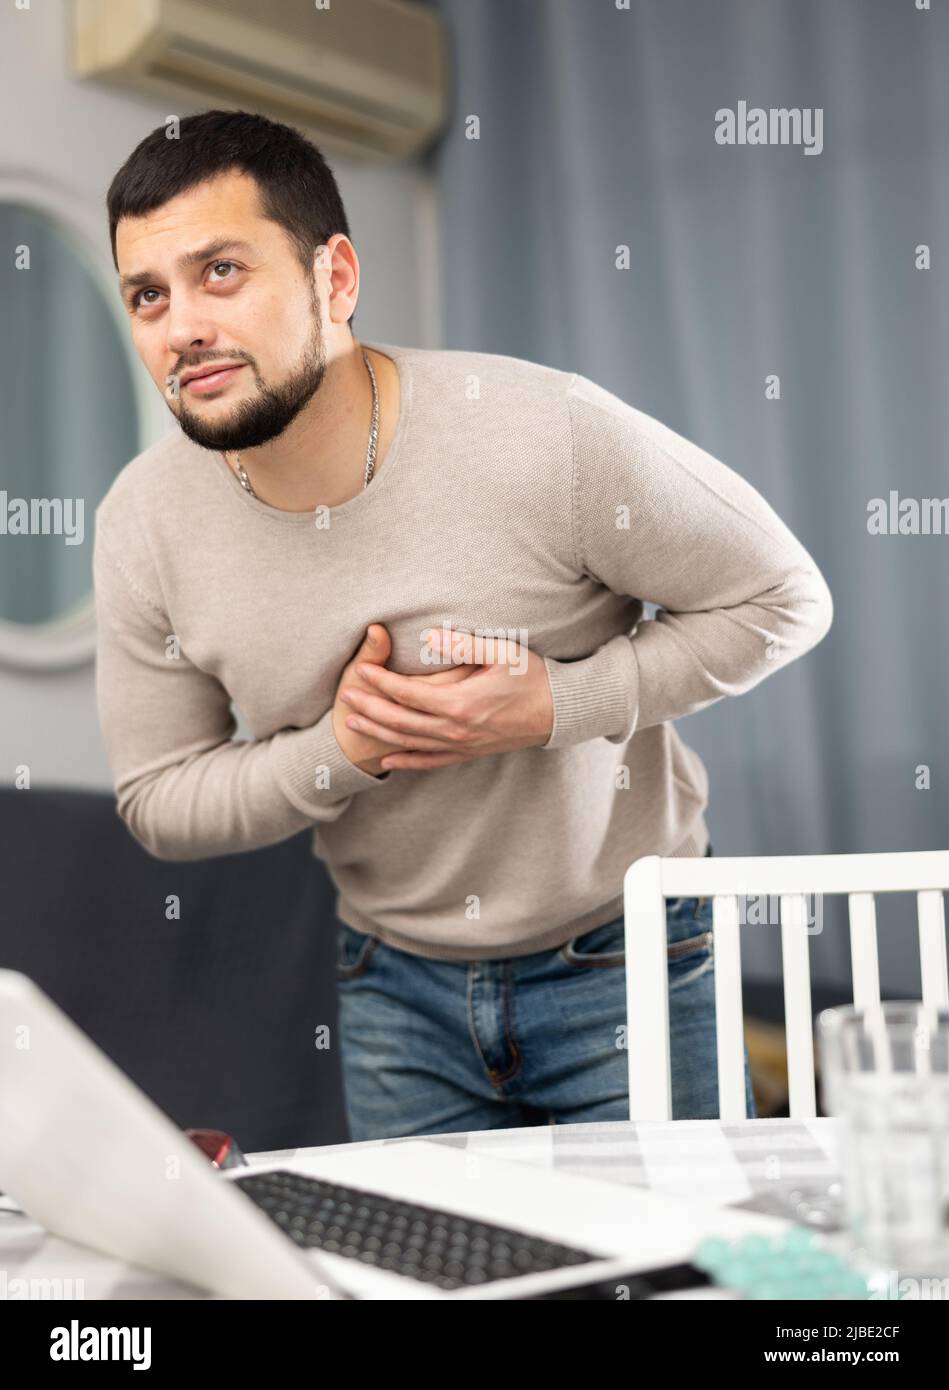 Young man having heart pain and feeling unwell at home Stock Photo